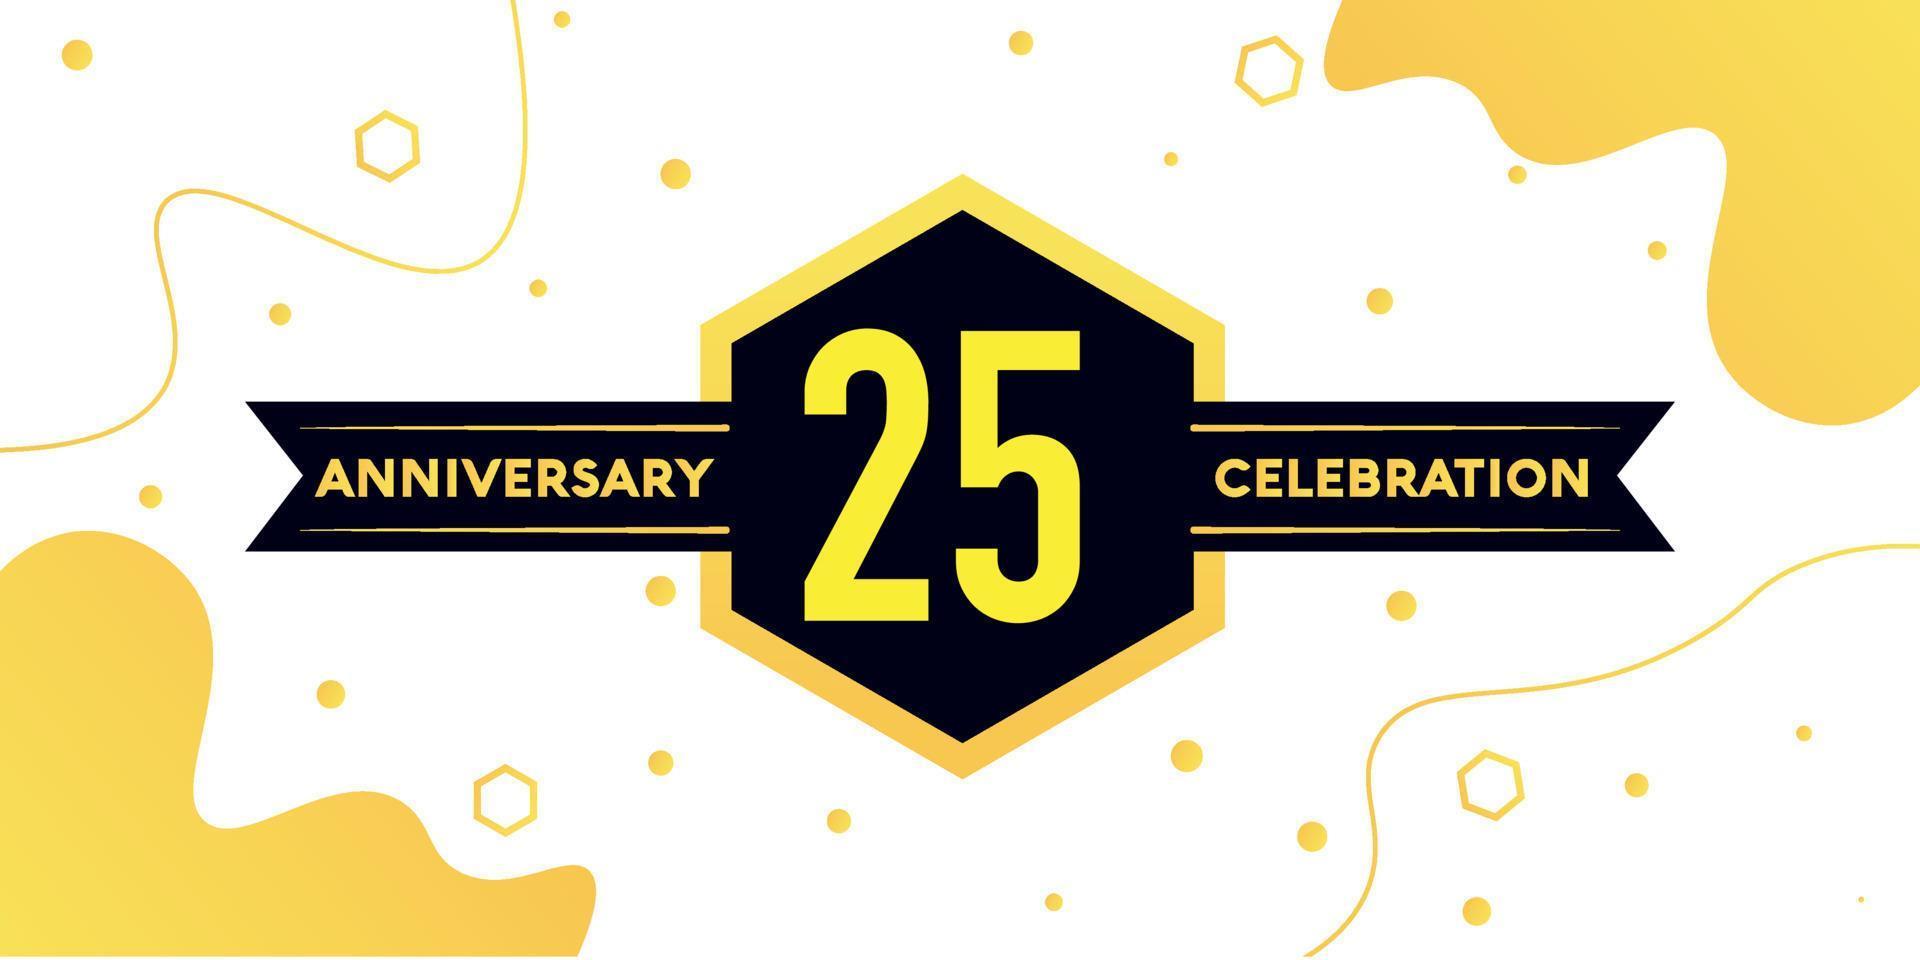 25 years anniversary logo vector design with yellow geometric shape with black and abstract design on white background template